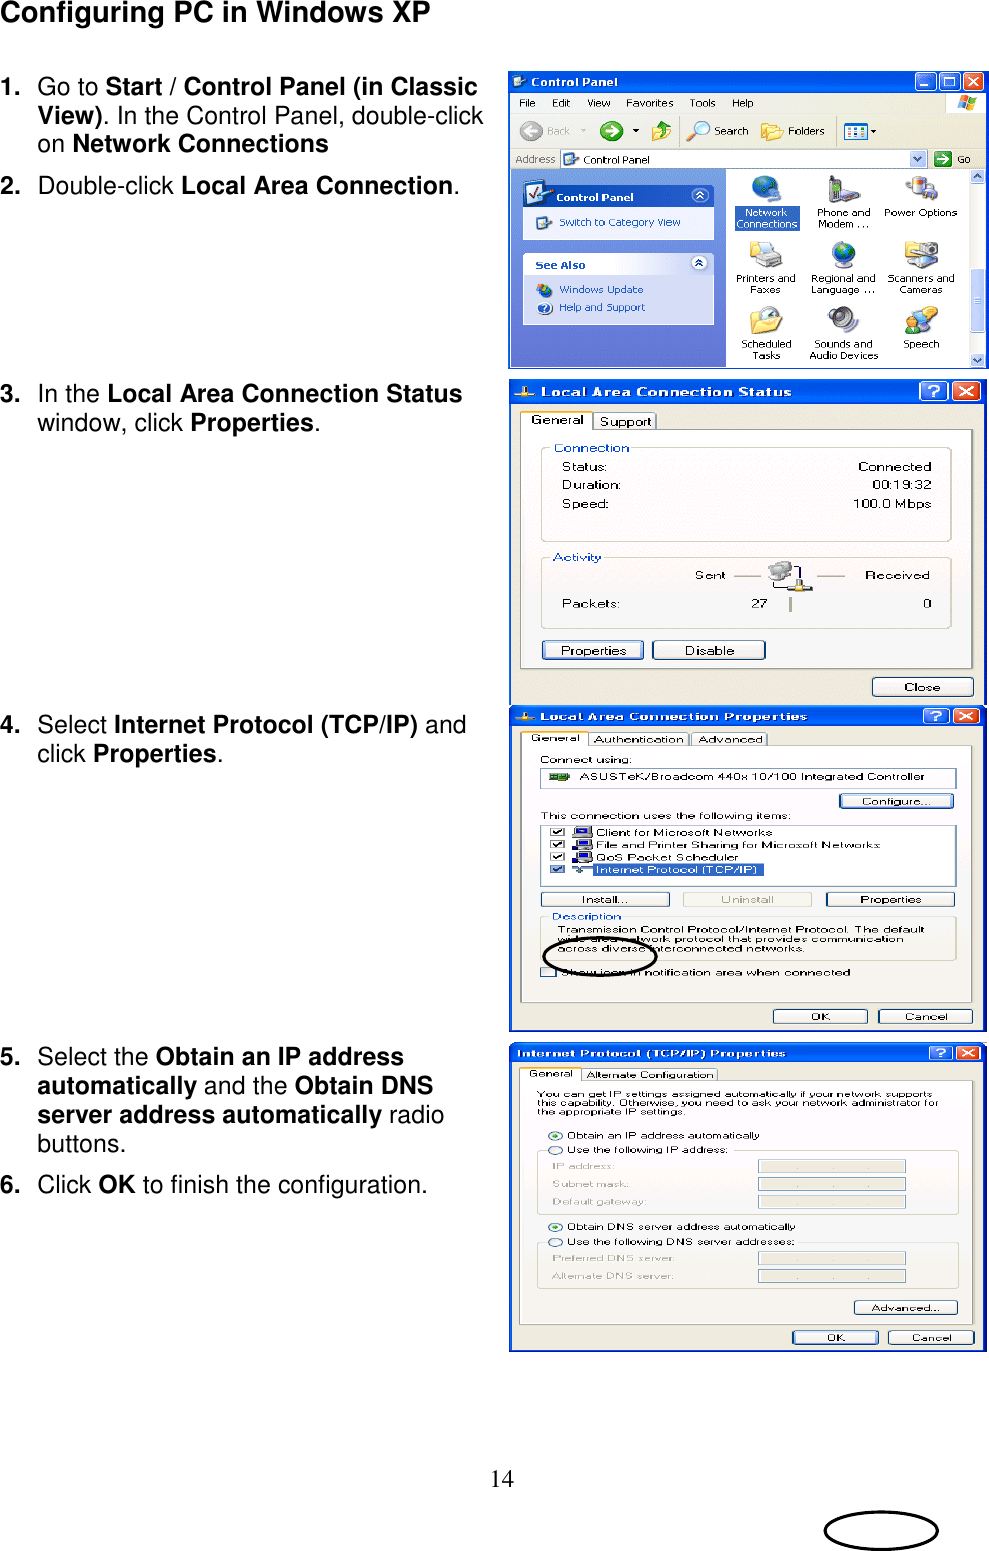 14 Configuring PC in Windows XP   1.  Go to Start / Control Panel (in Classic View). In the Control Panel, double-click on Network Connections 2.  Double-click Local Area Connection.   3.  In the Local Area Connection Status window, click Properties.  4.  Select Internet Protocol (TCP/IP) and click Properties.  5.  Select the Obtain an IP address automatically and the Obtain DNS server address automatically radio buttons. 6.  Click OK to finish the configuration.   